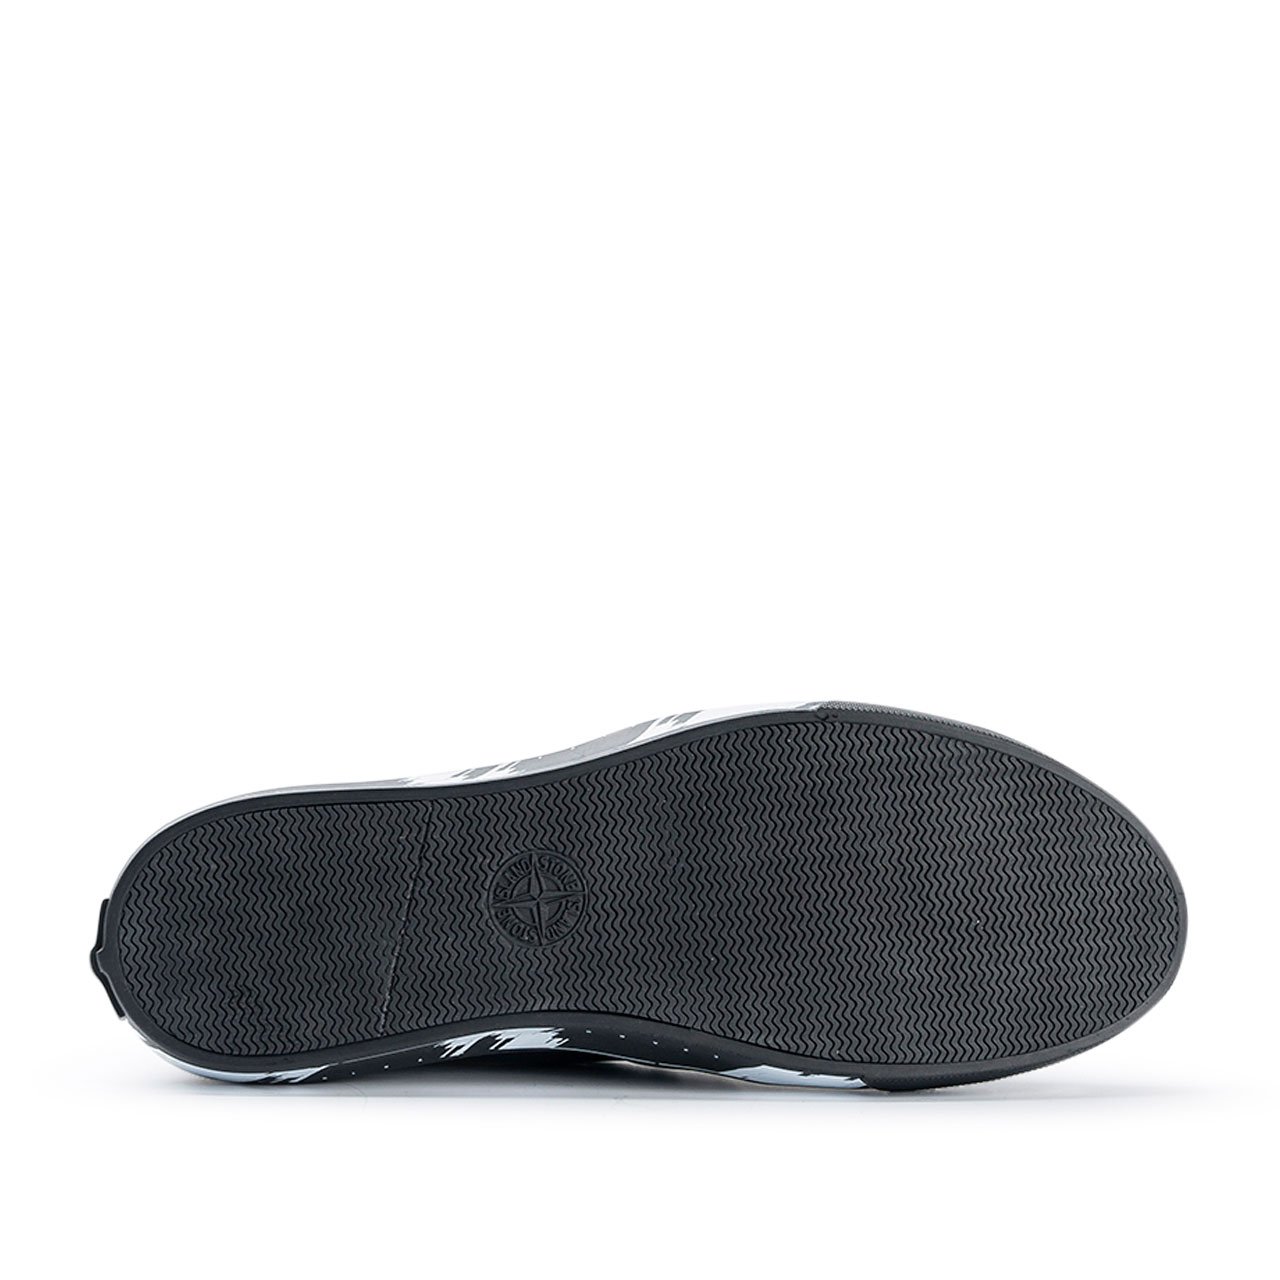 stone island shadow project slip-on mid leather (black) - 7219s0123.v0029 - a.plus - Image - 6